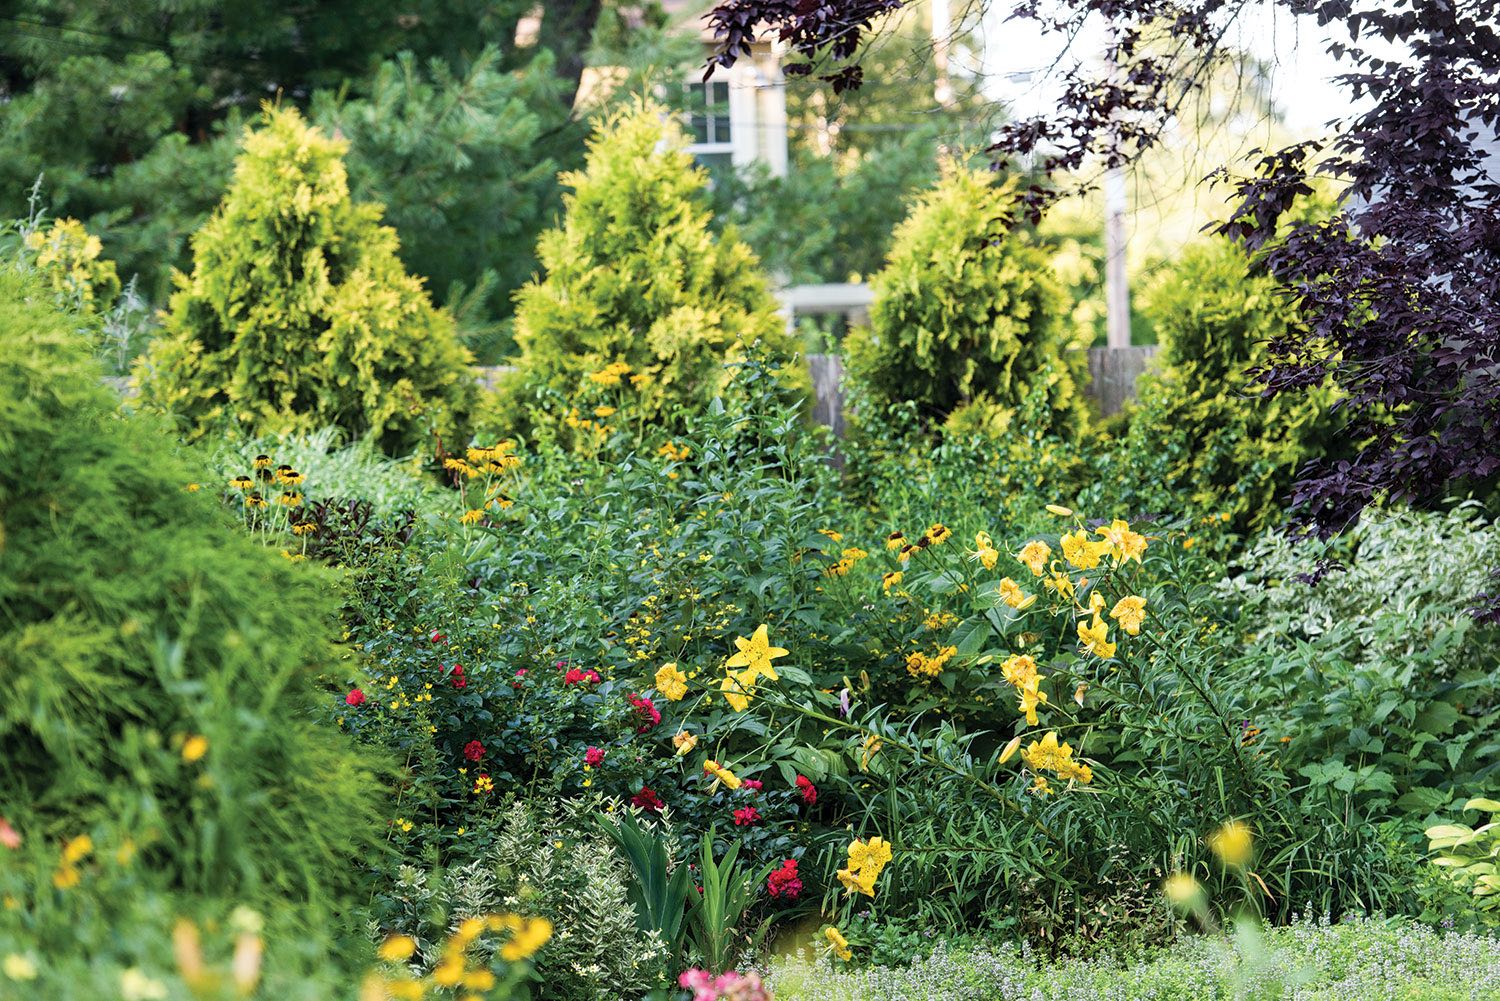 border of daylilies and other flowers in front of a variegated hedge of thuja or arborvitae